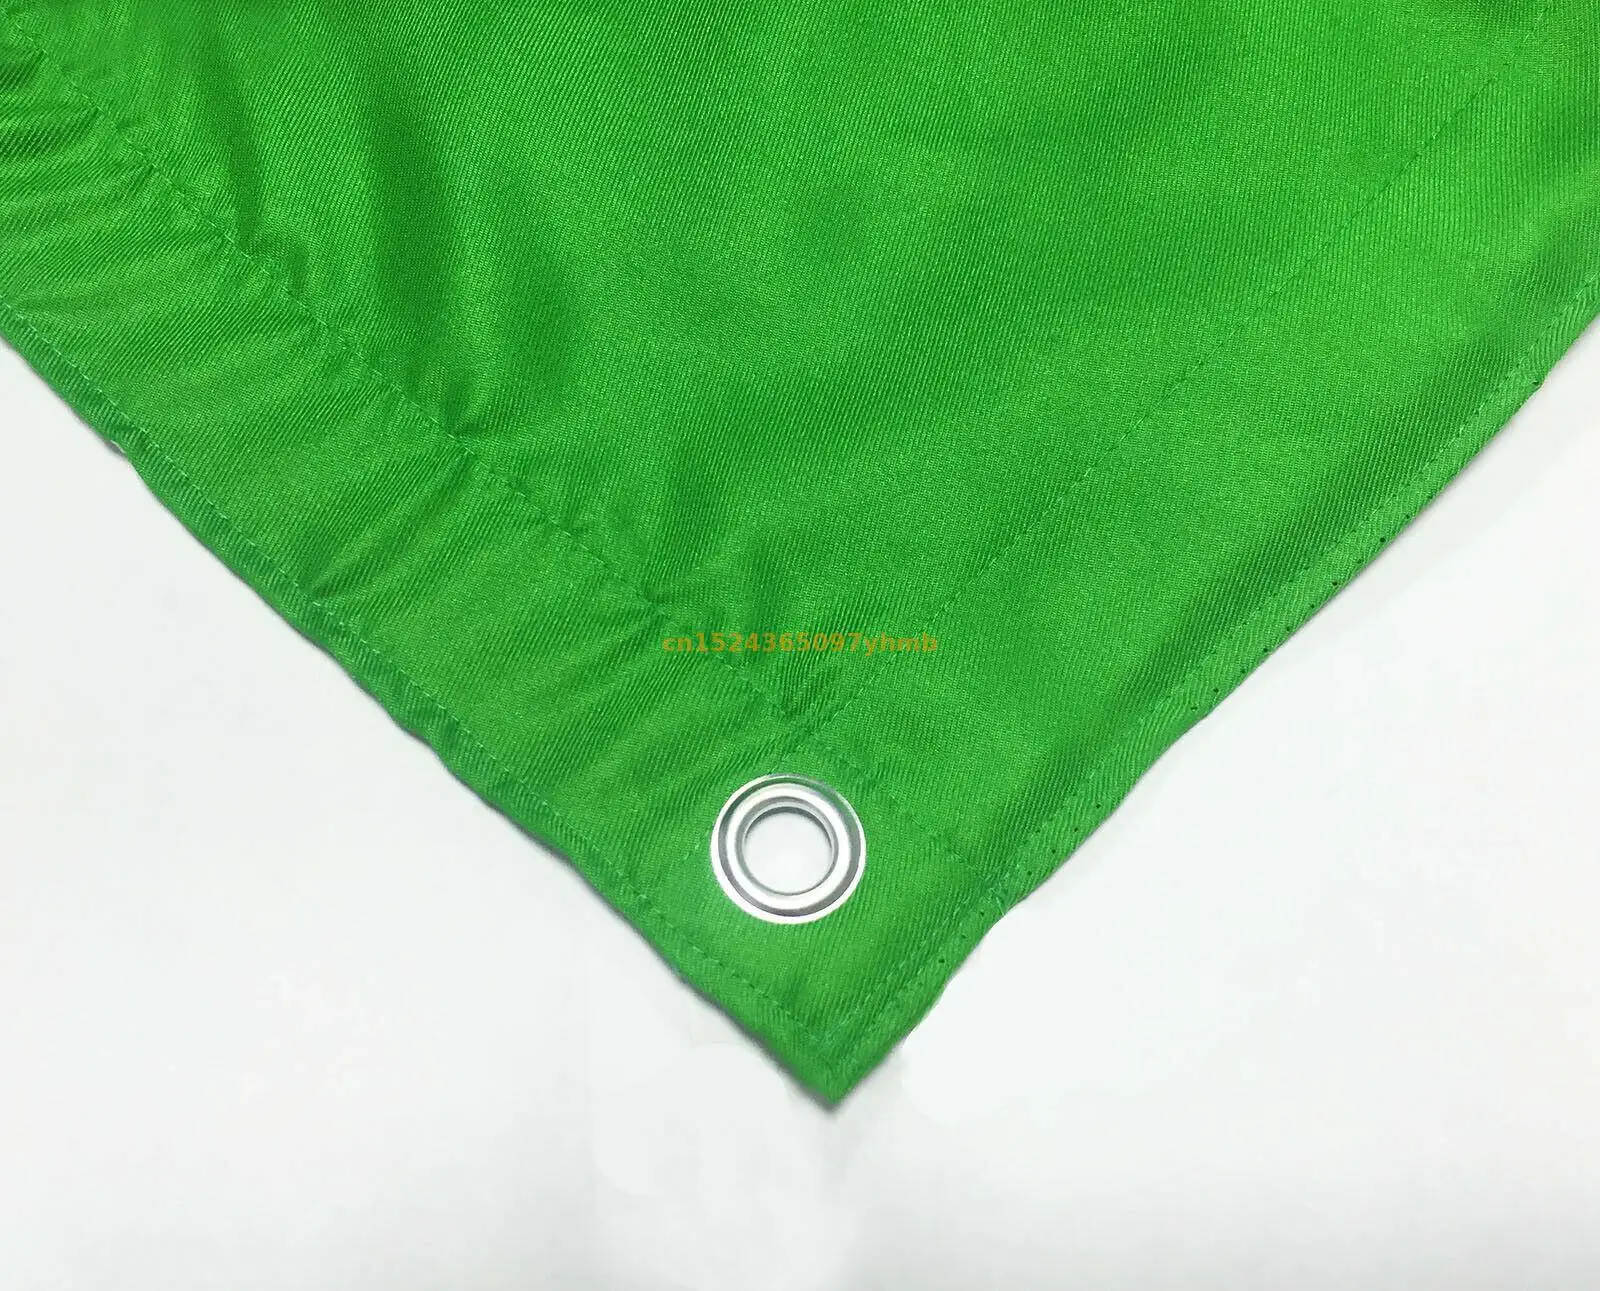 

12'x12' 12x12 3.6x3.6m Chromakey Green Backdrop Cloth overhead butterfly Fabrics for Photographic Film Shooting Background